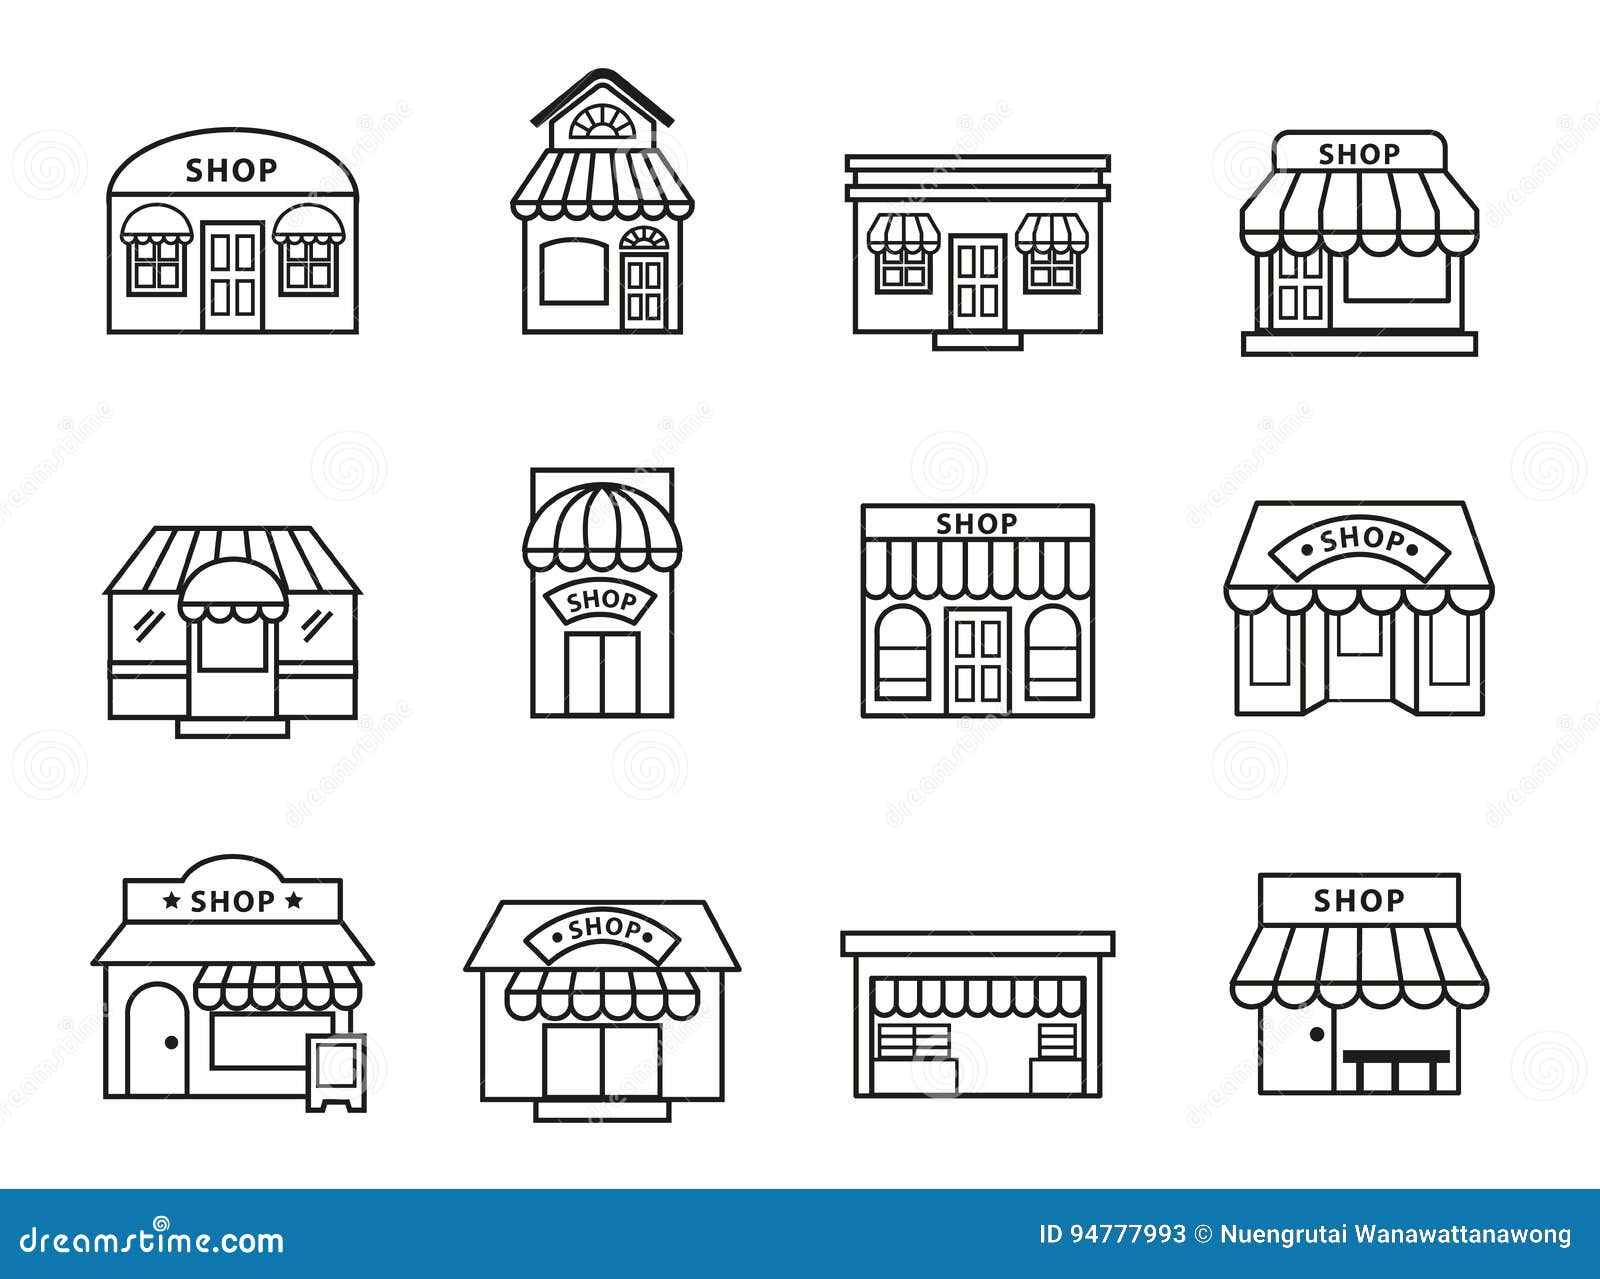 shops and stores building icons set.